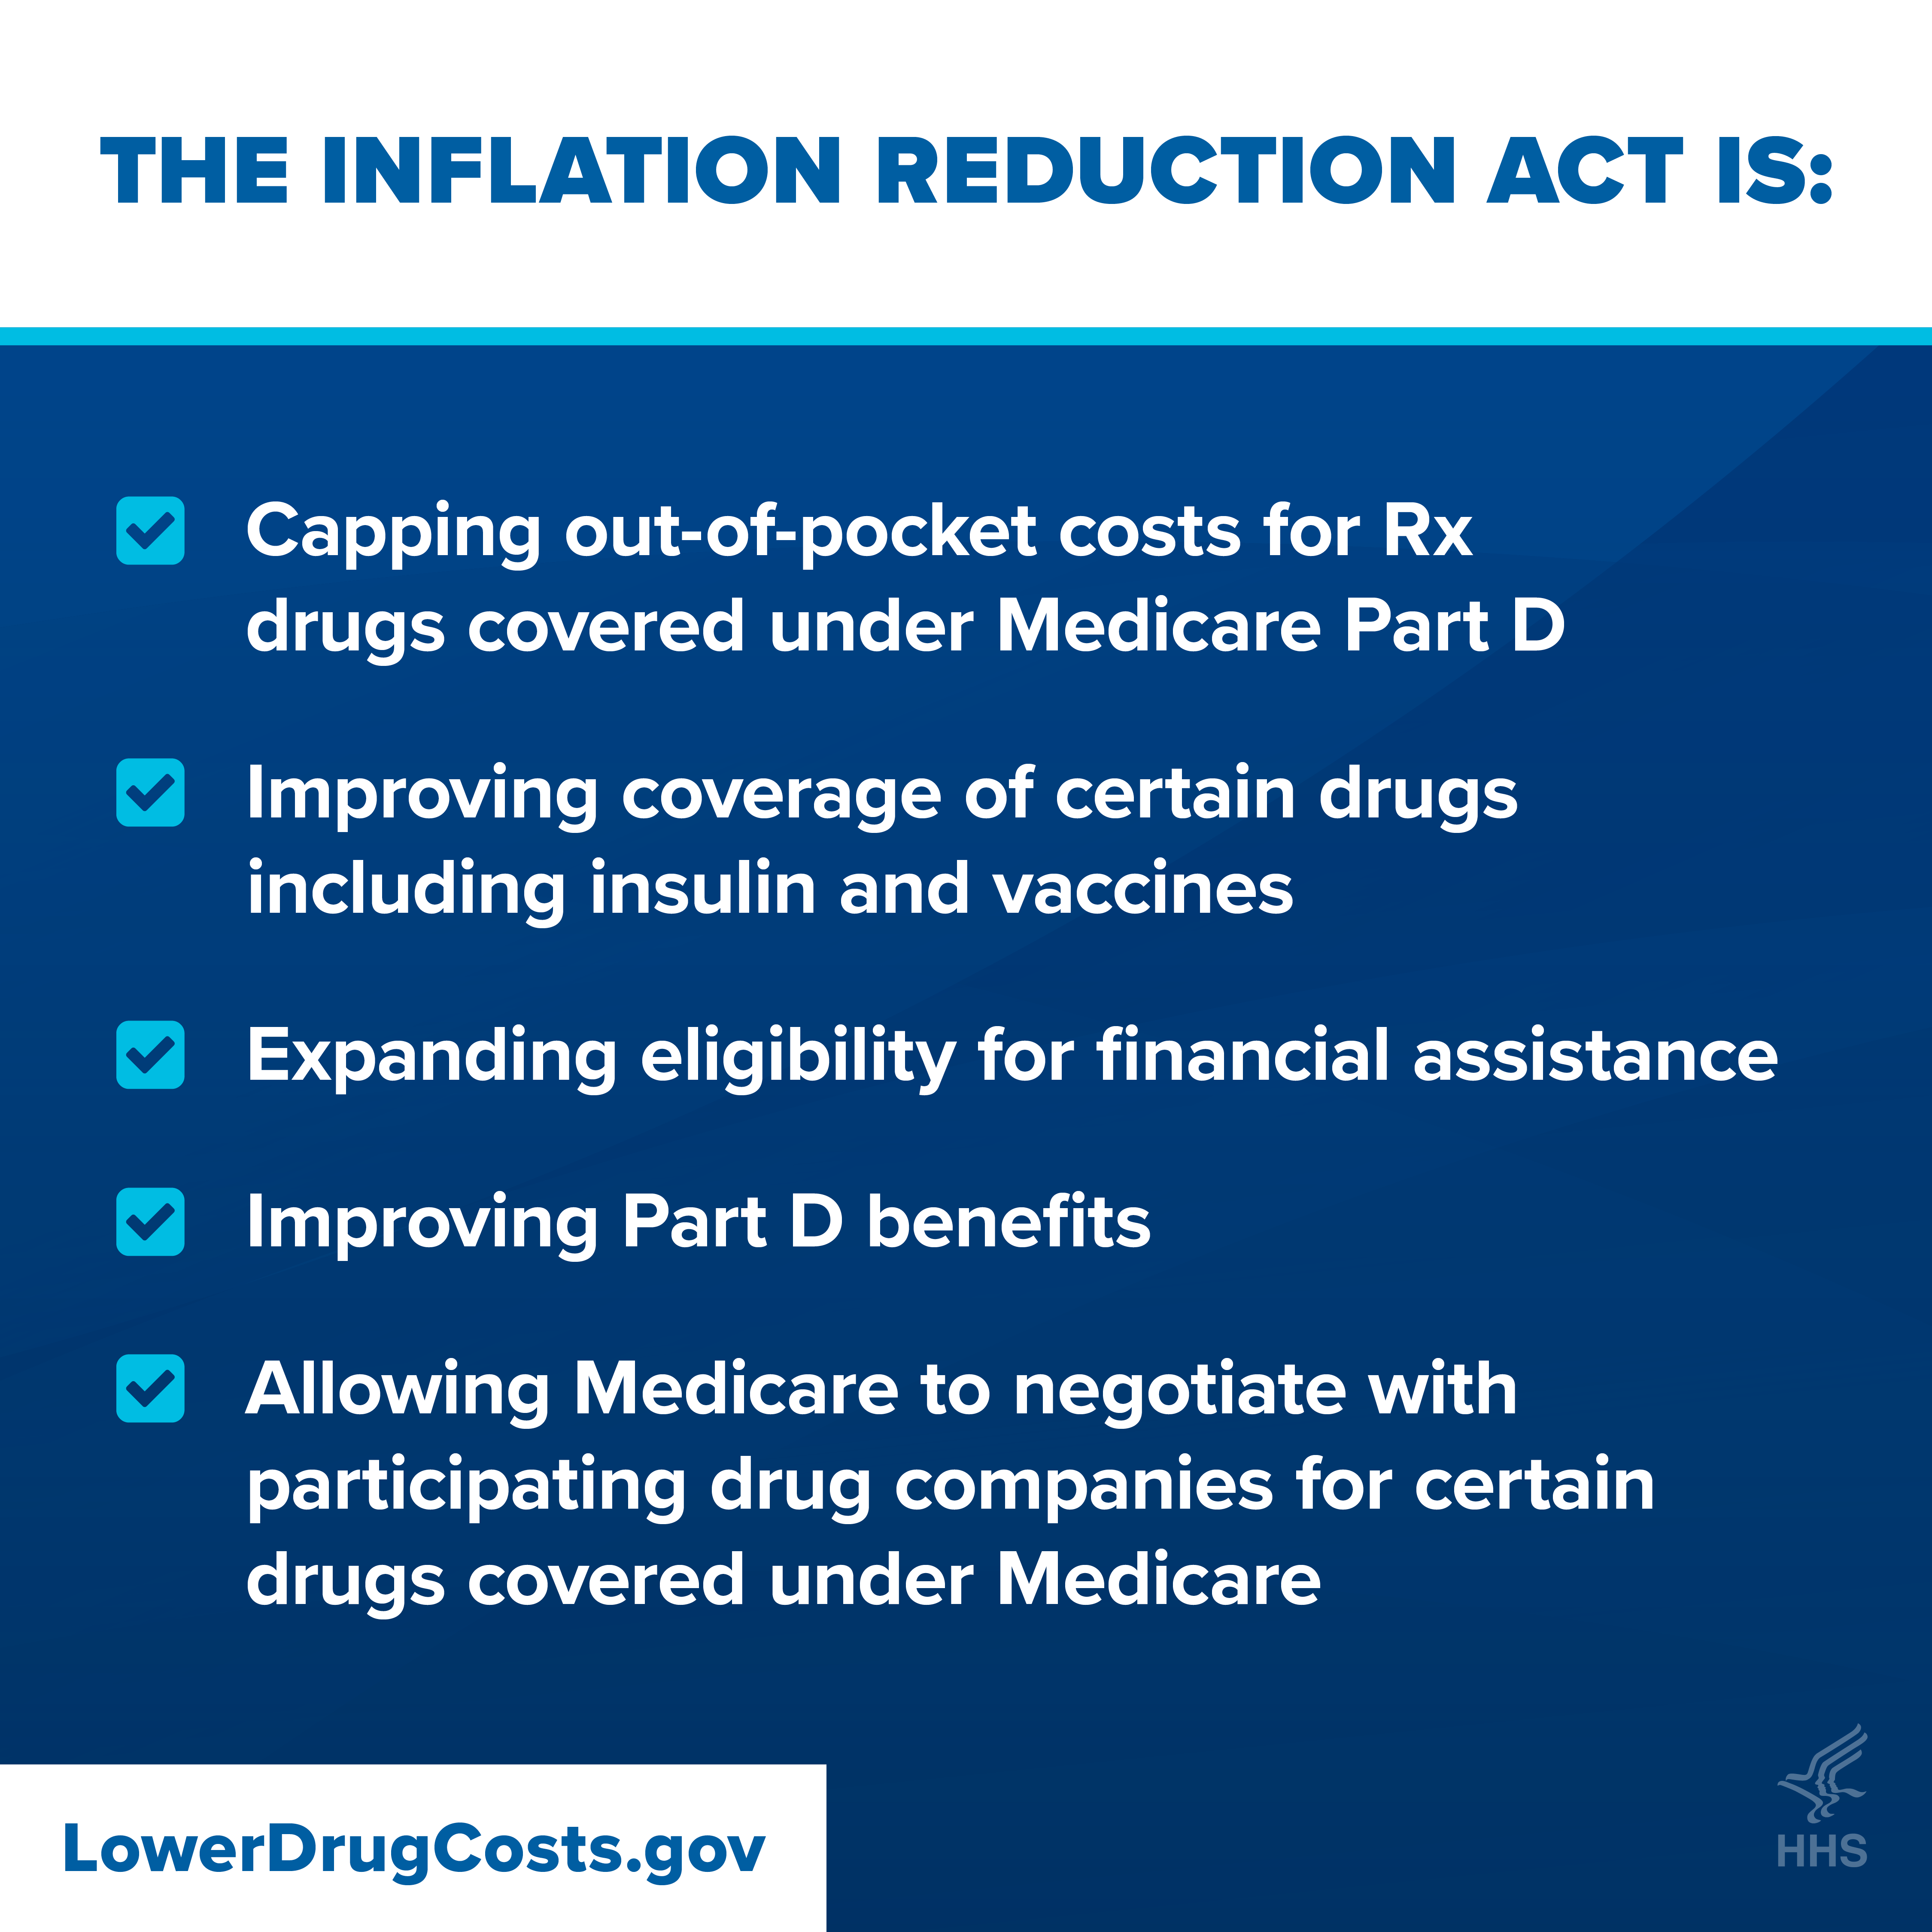 The Inflation Reduction Act is:Capping out-of-pocket costs for Rx drugs covered under Part DImproving coverage of certain drugs including insulin and vaccines Expanding eligibility for financial assistanceChanging the Part D benefit structure Authorizing the HHS Secretary to negotiate prices of select Rx drugs directly with participating manufacturers